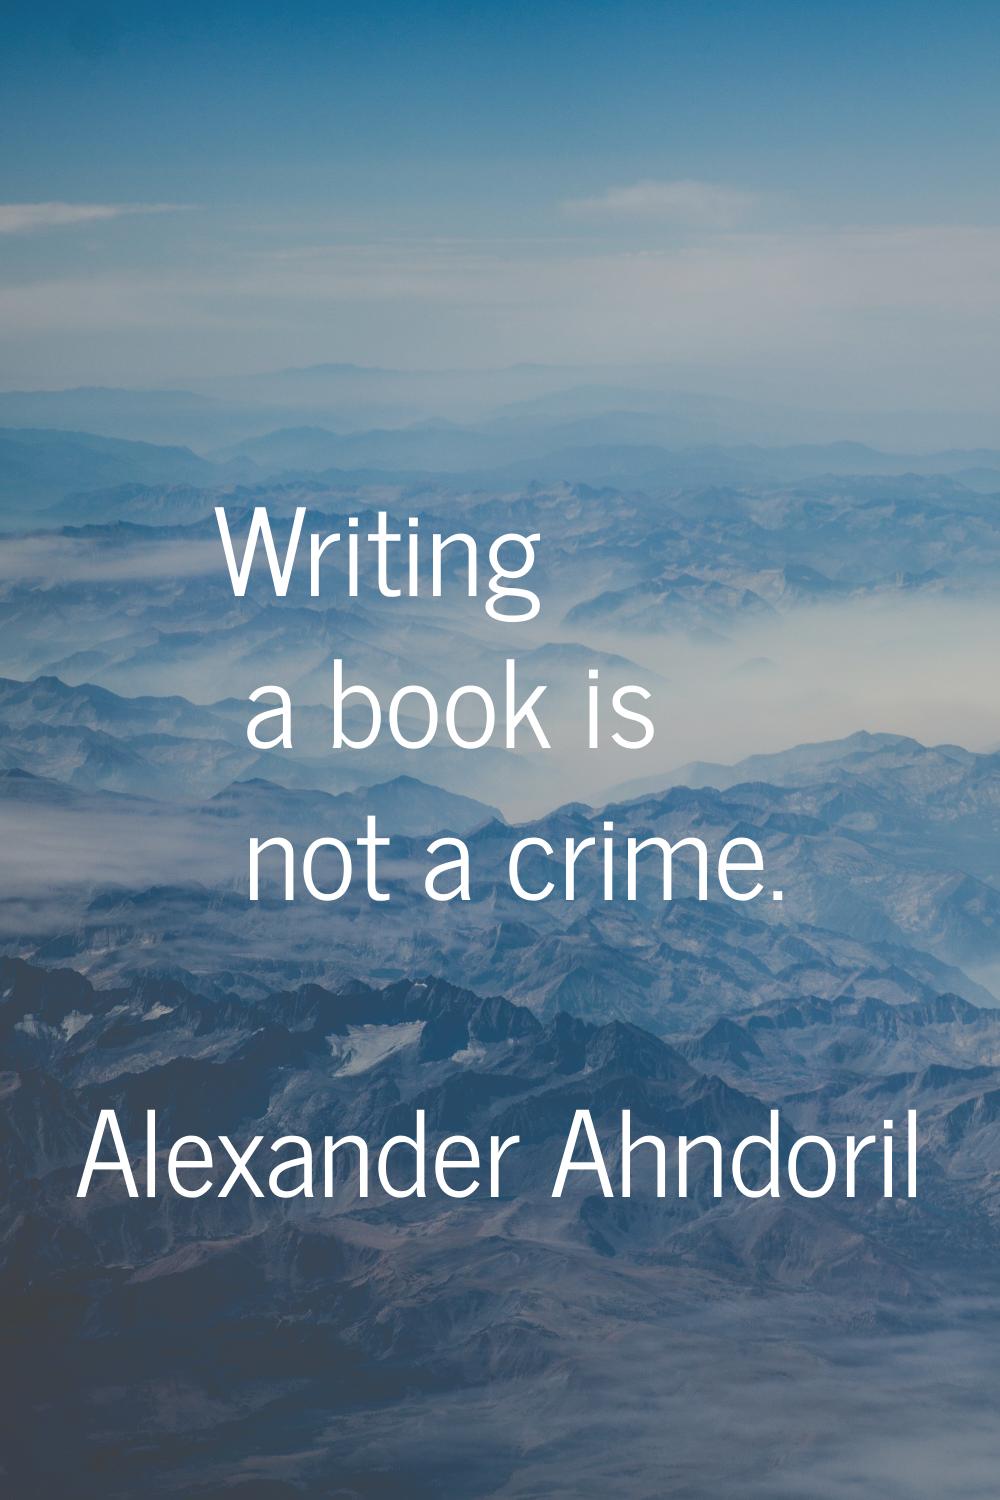 Writing a book is not a crime.